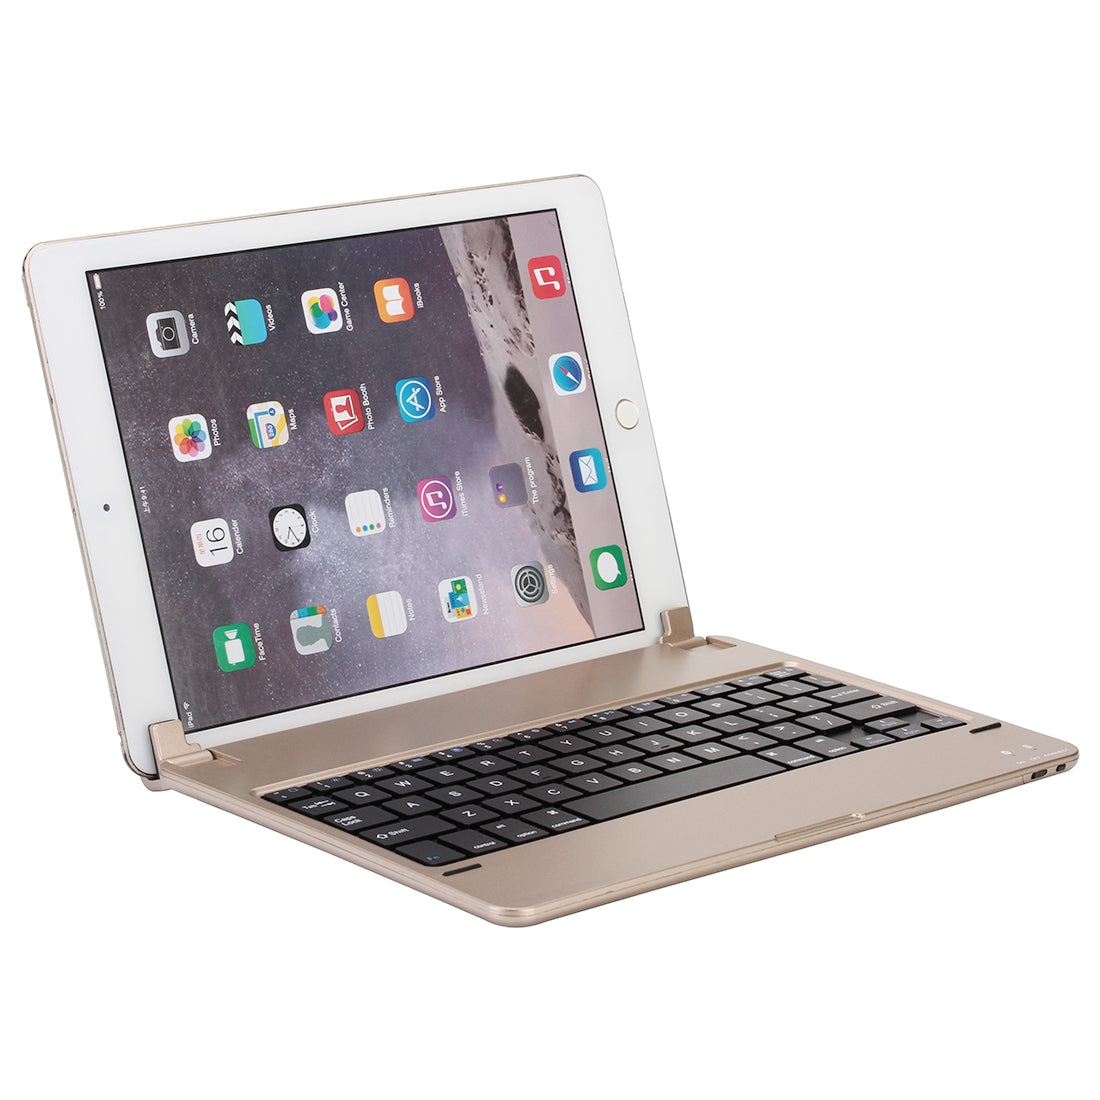 P1305 For iPad Air 2 & Air 1 / Pro 9.7 inch & 2017 iPad & 2018 iPad Plug-in Card Slot Plastic Bluetooth Keyboard Protective Cover with Stand Function